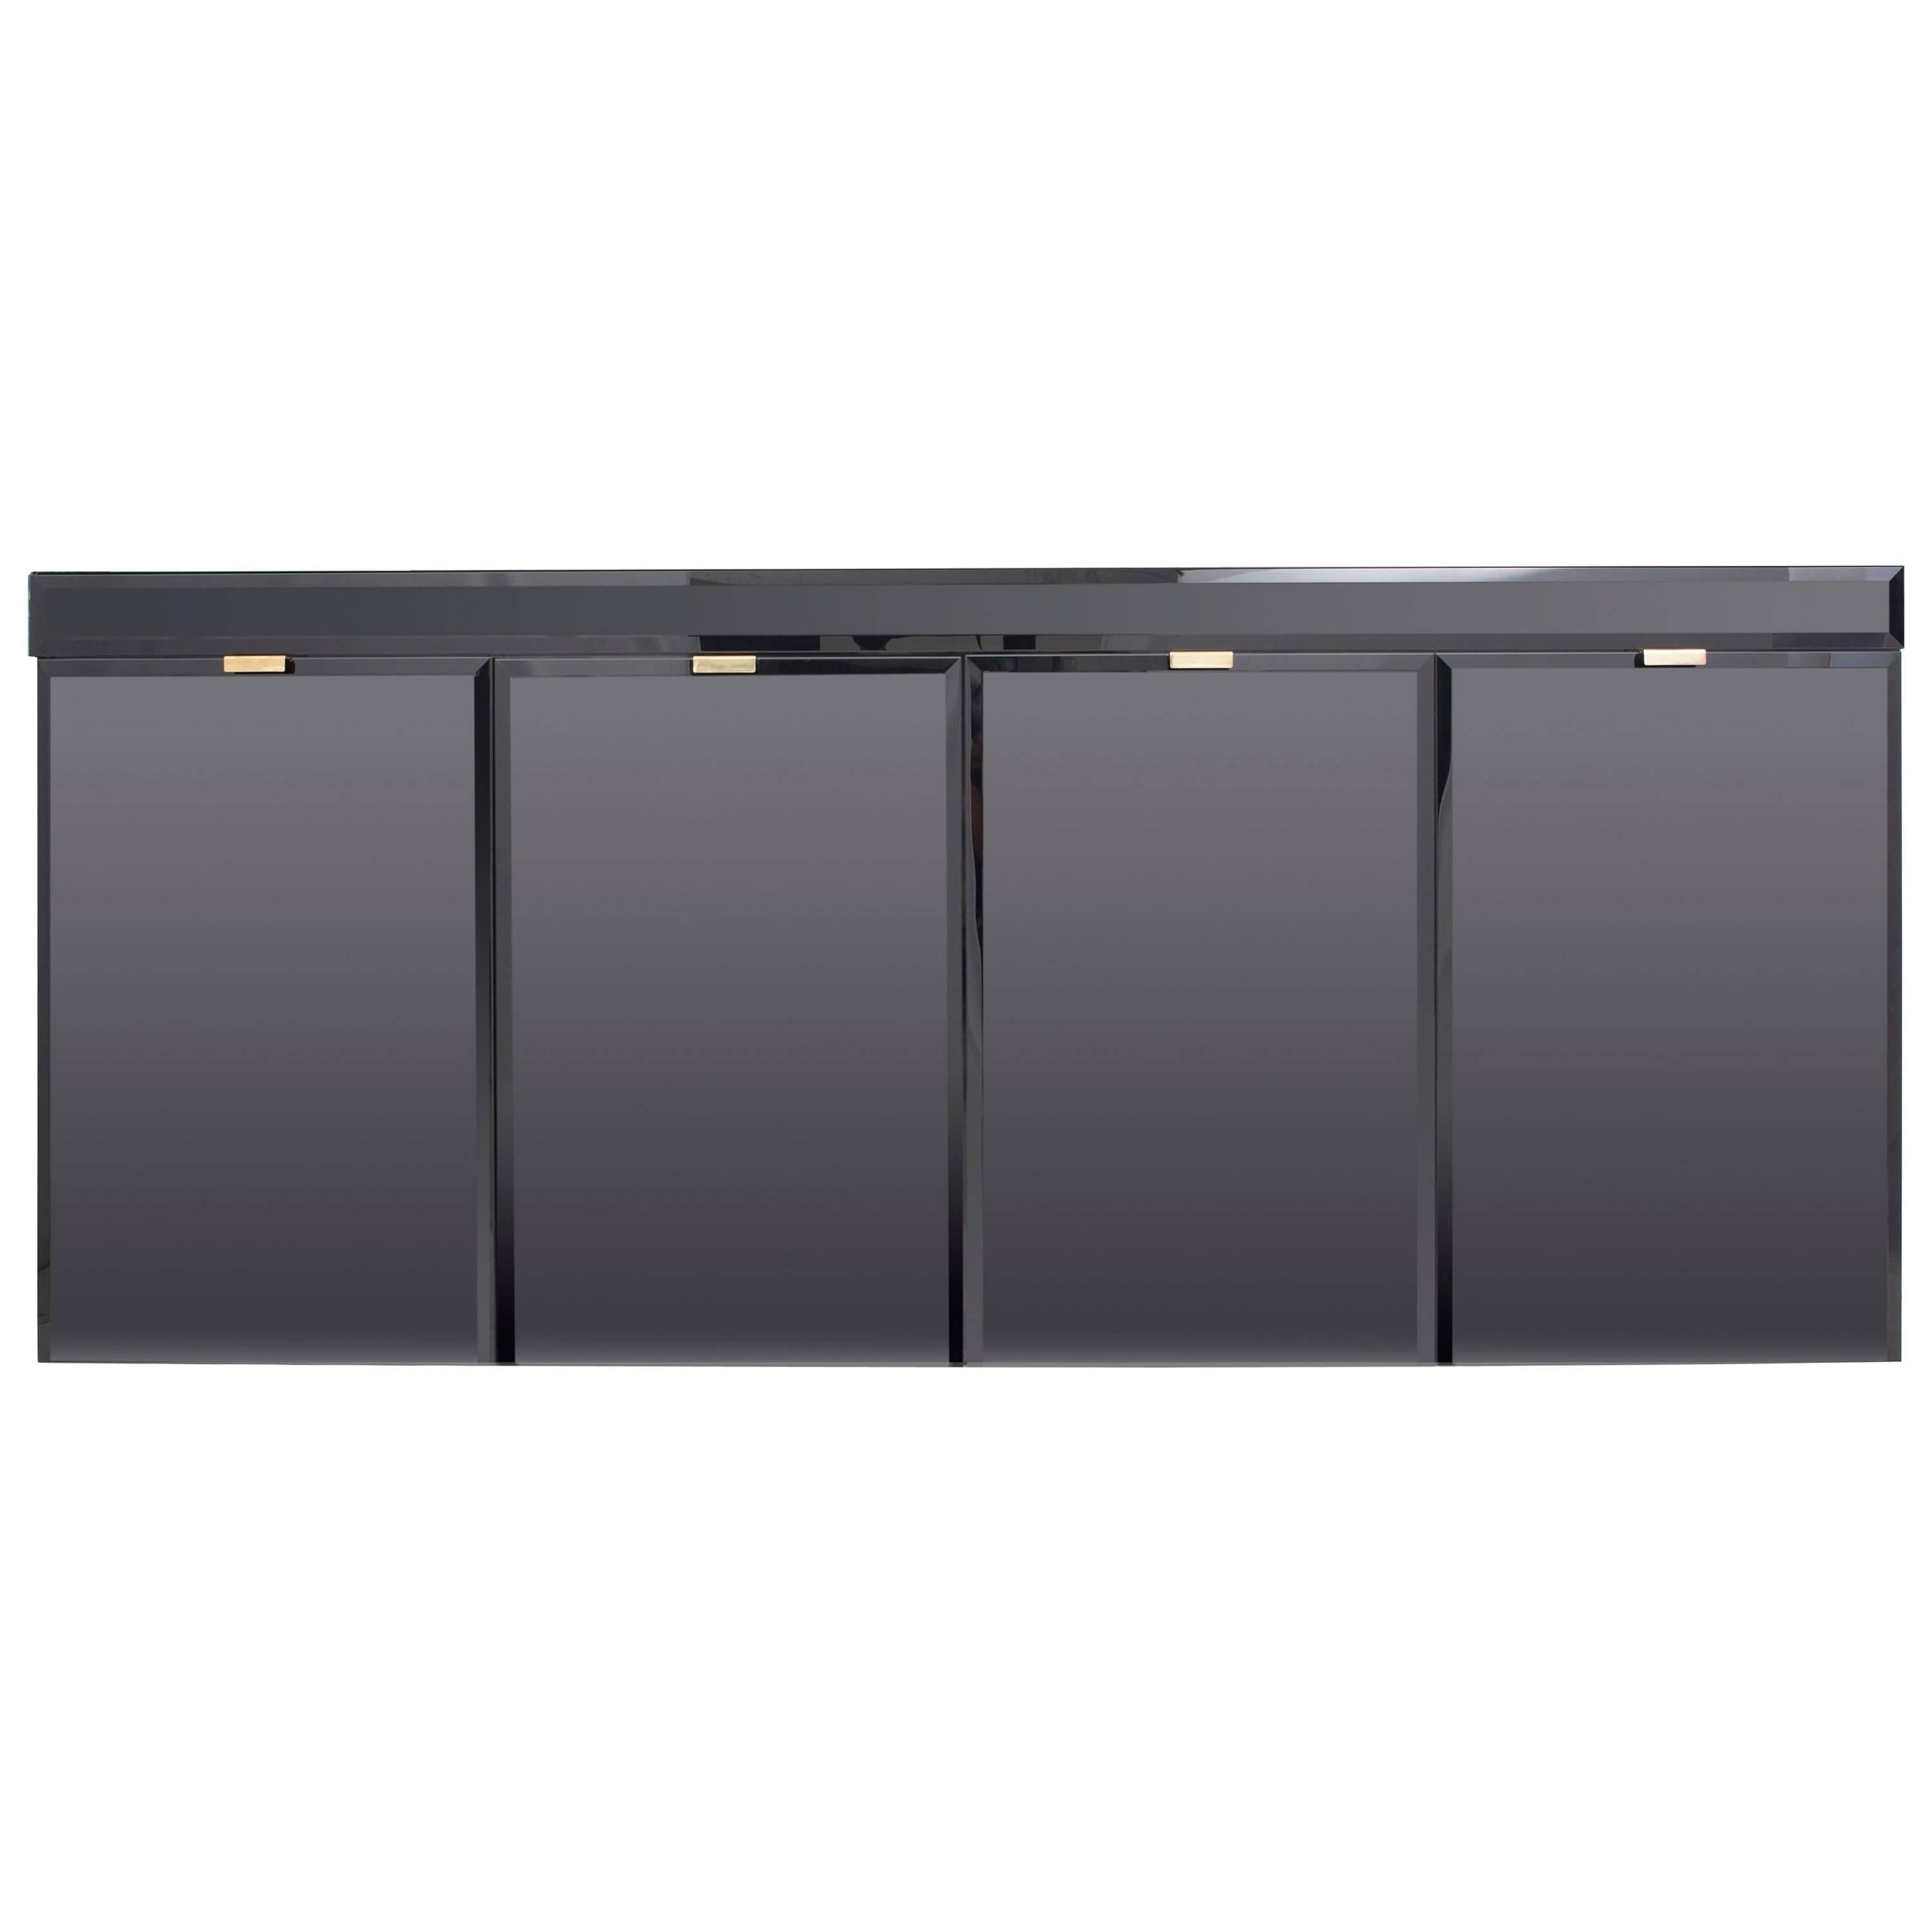 Maison Jansen style Hollywood Regency four-door sideboard.
Amazing detail and quality make this a very elegant piece.

Due to it's slim design it fits almost every space and still provides plenty of storage.

All black hyalite glass all-round